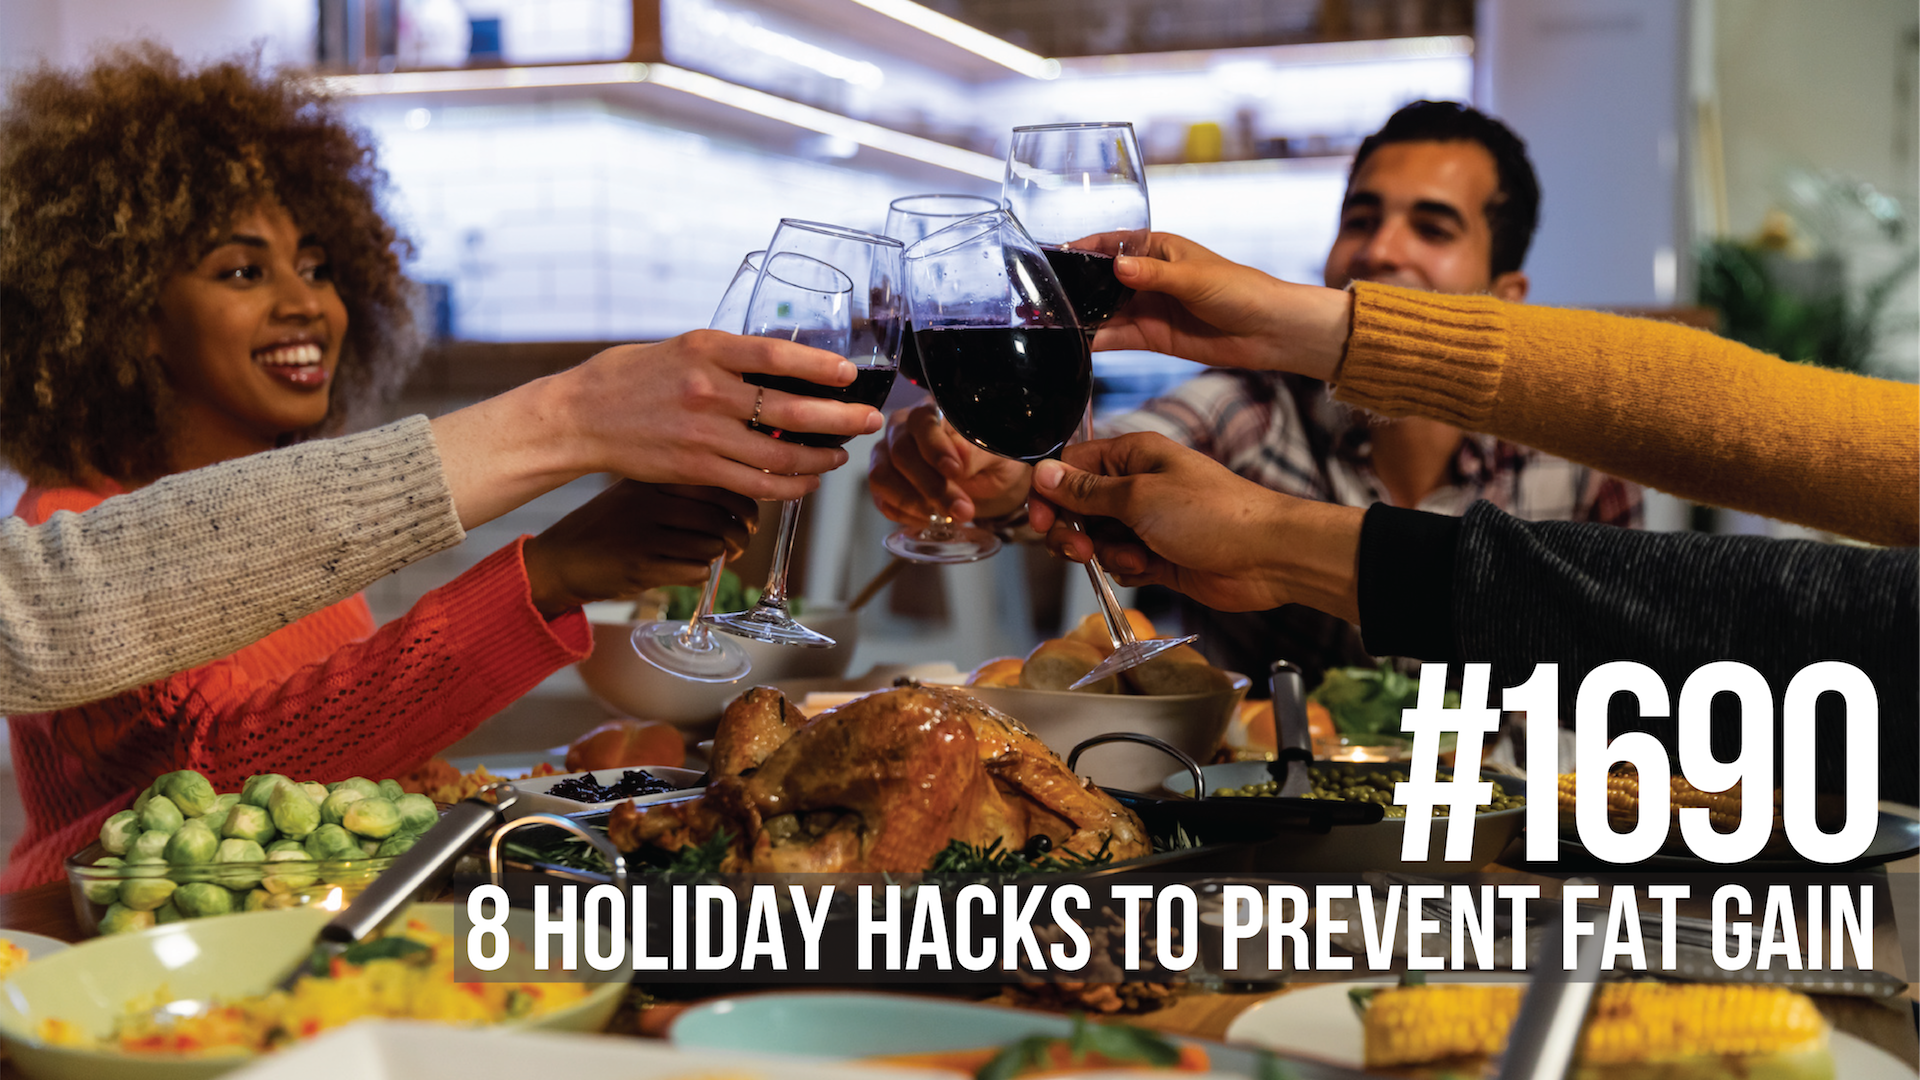 1690: Eight Holiday Hacks to Prevent Fat Gain